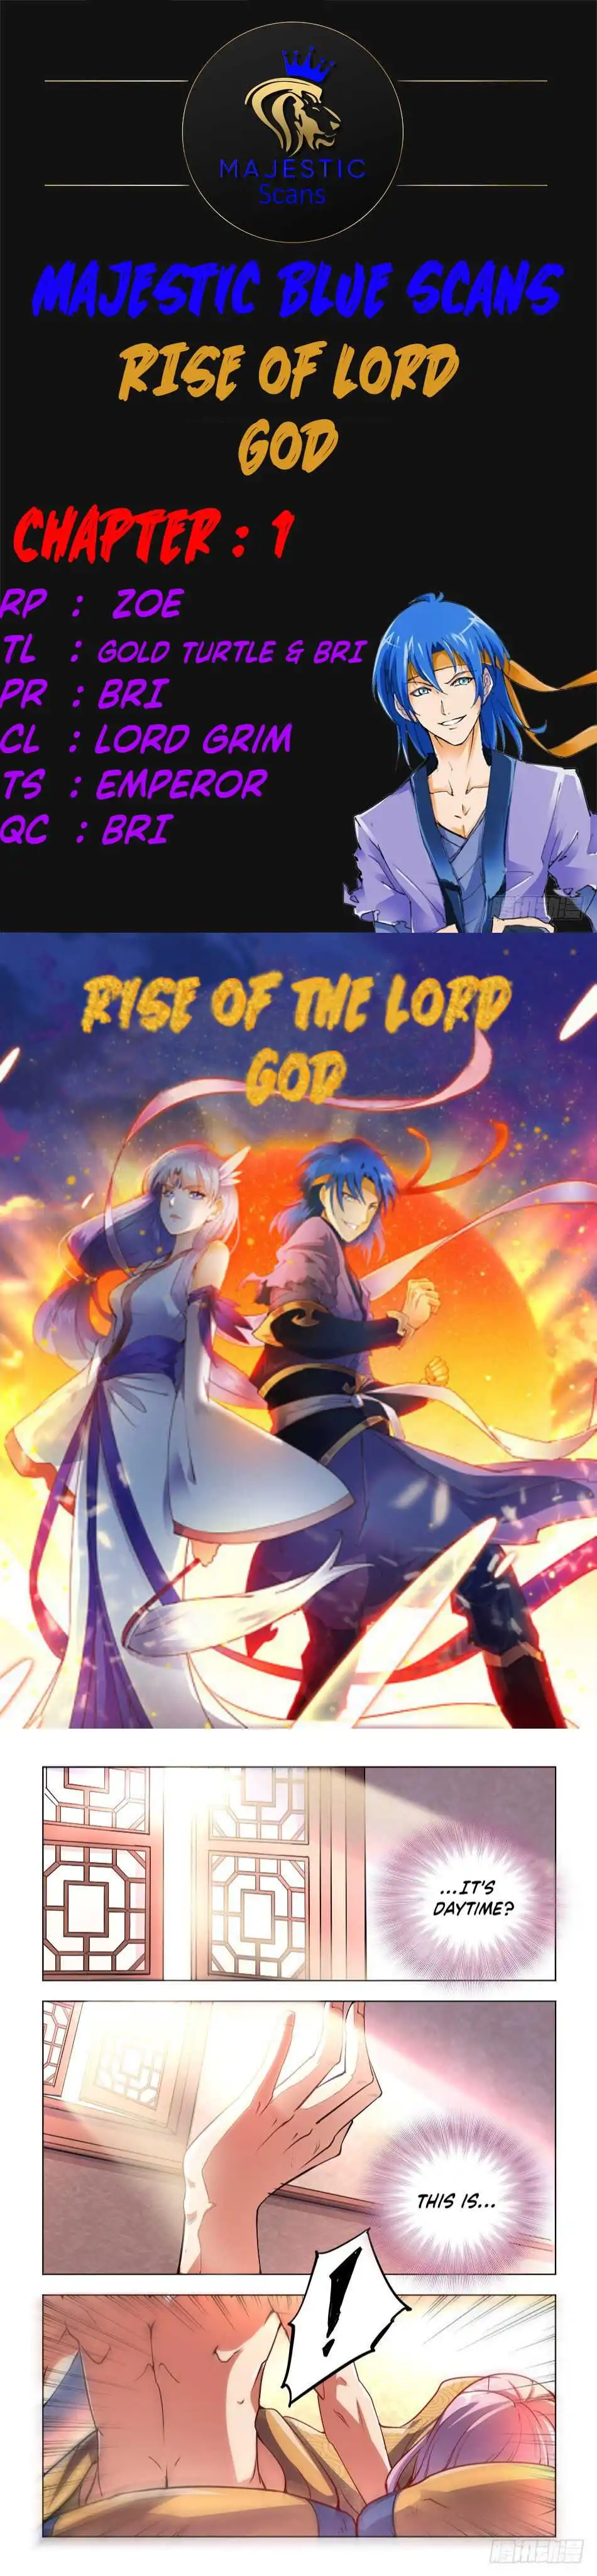 Rise of The Lord God Chapter 1